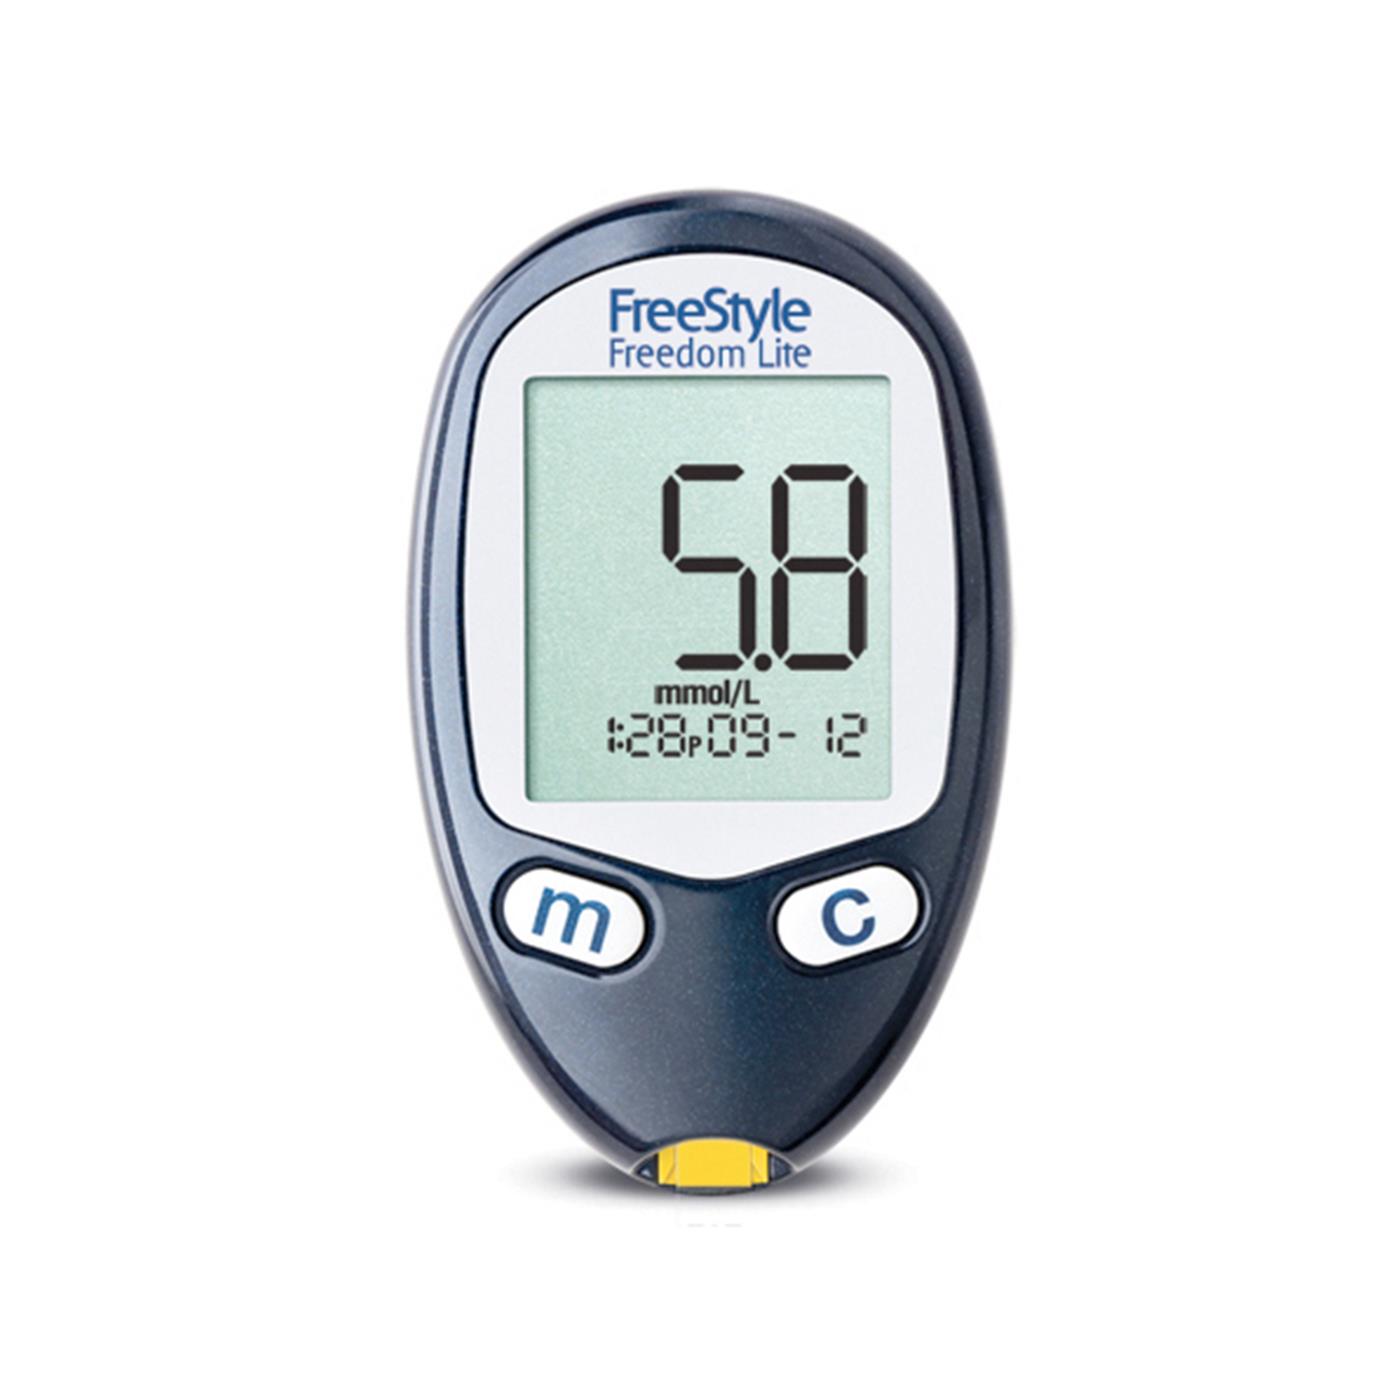 The FreeStyle Freedom Lite Blood Glucose Monitor|The FreeStyle Freedom Lite Blood Glucose Monitor Box